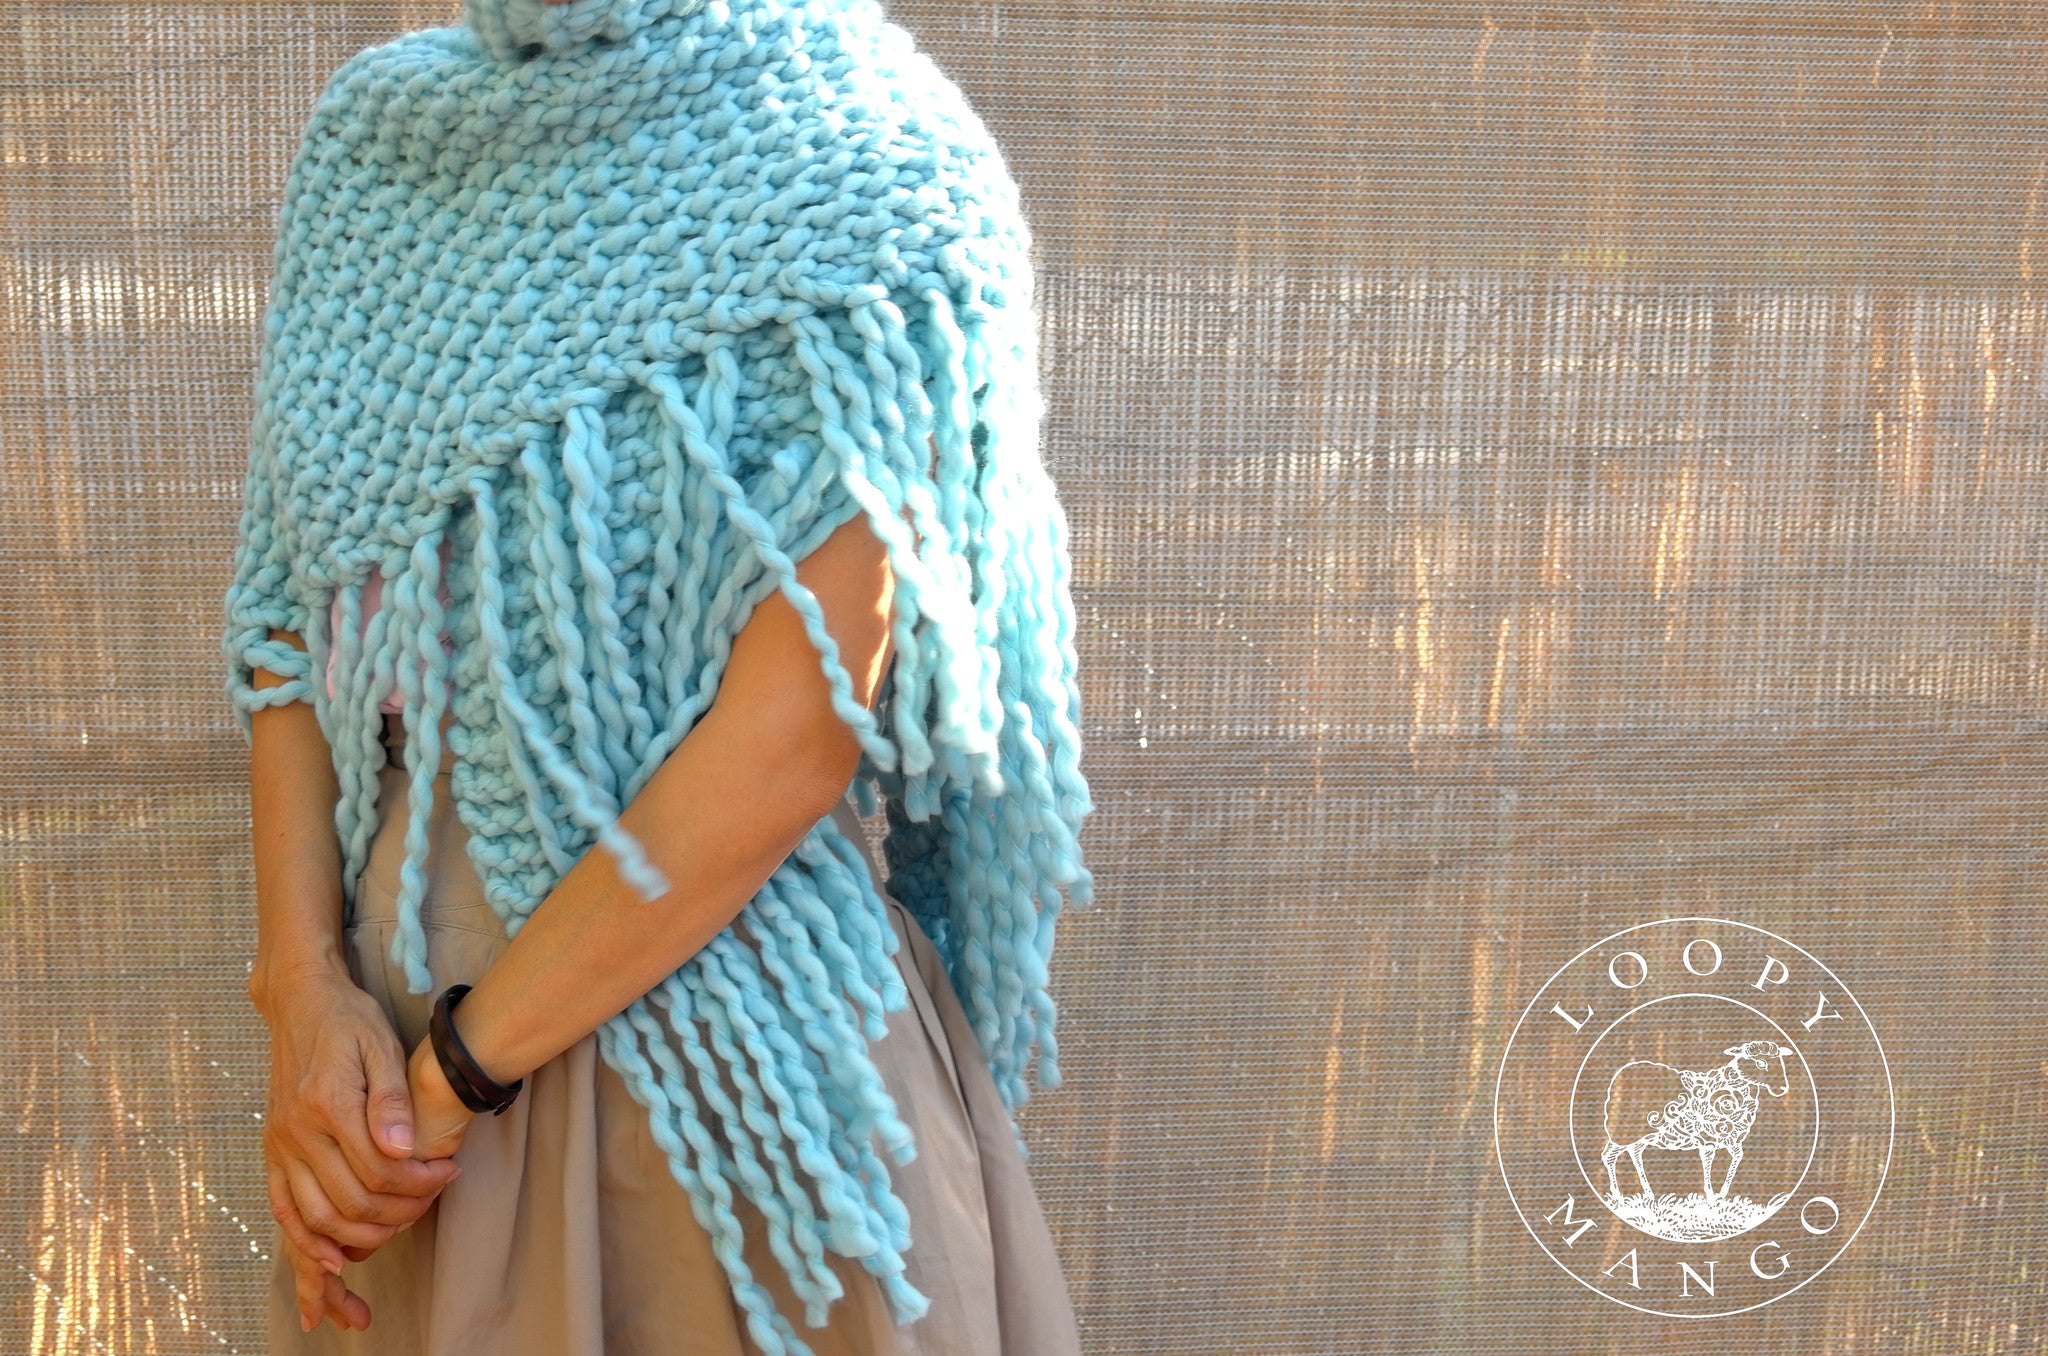 READY TO SHIP READYMADE CLEARANCE SALE!! - Her Fringe Shawl - Merino